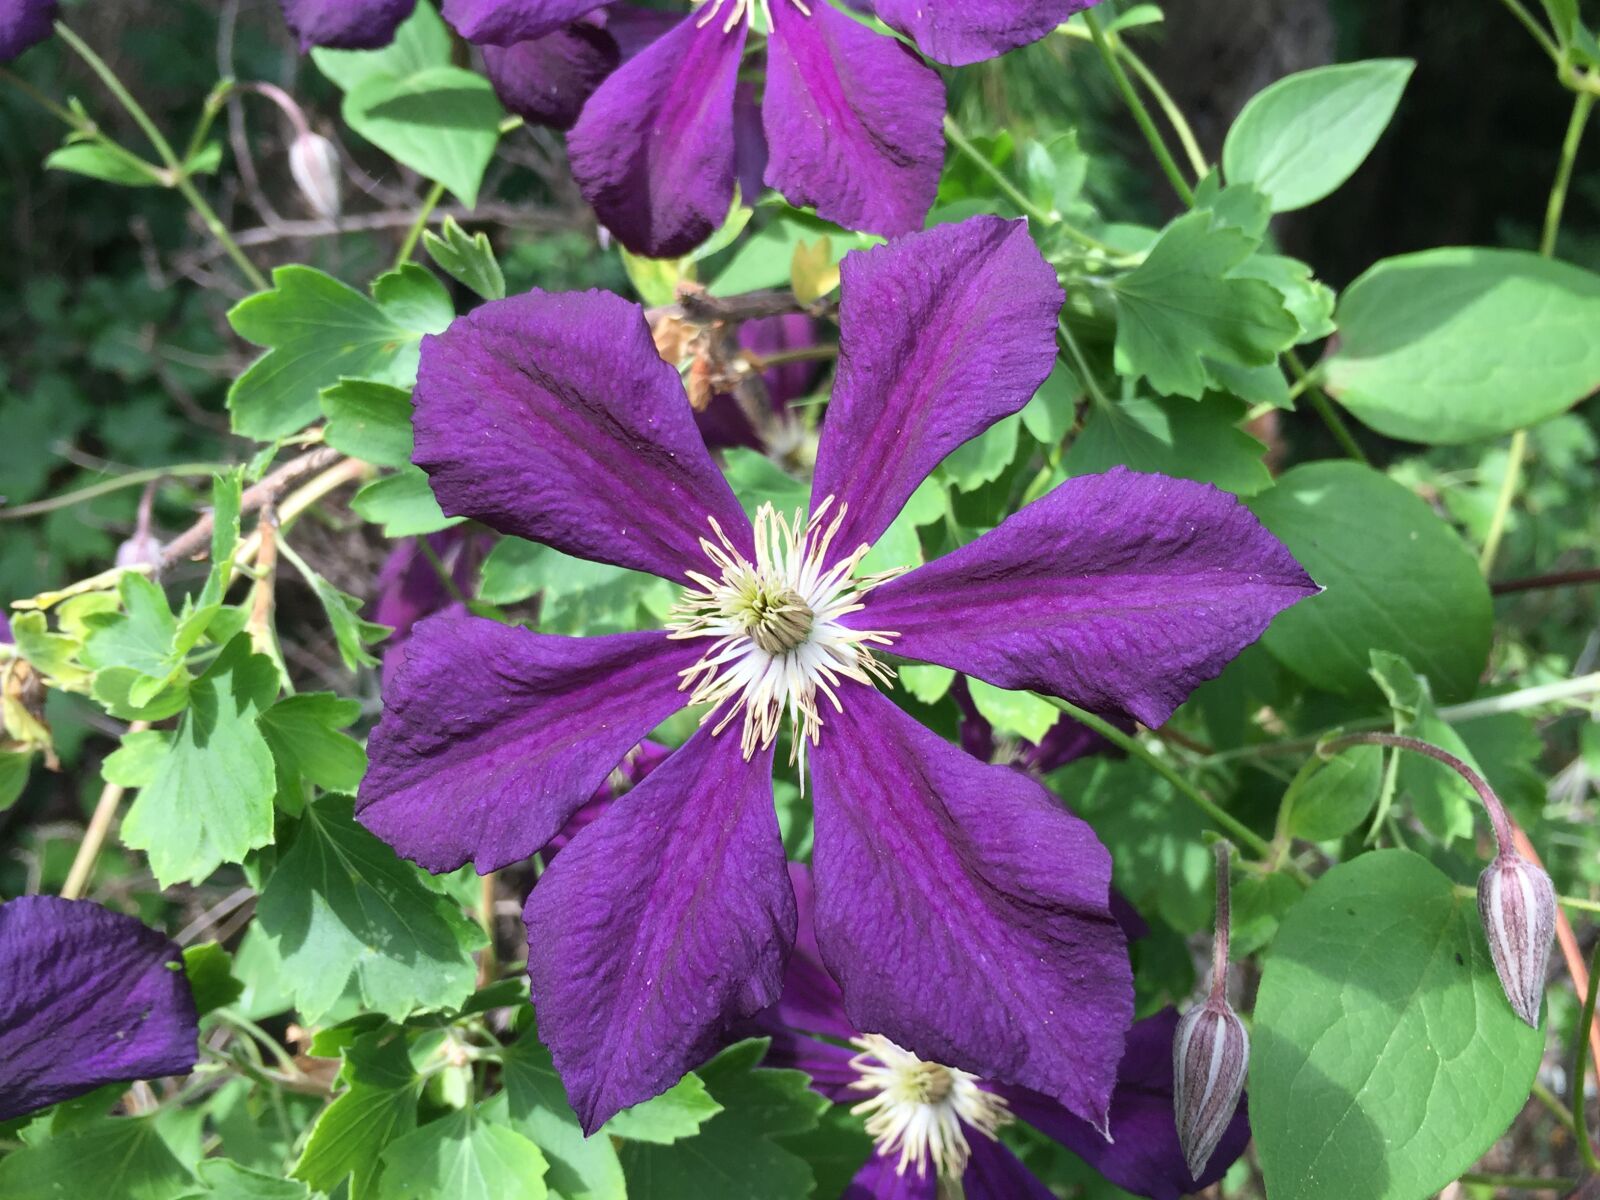 Apple iPhone 6 Plus + iPhone 6 Plus back camera 4.15mm f/2.2 sample photo. Clematis, plant, flower photography